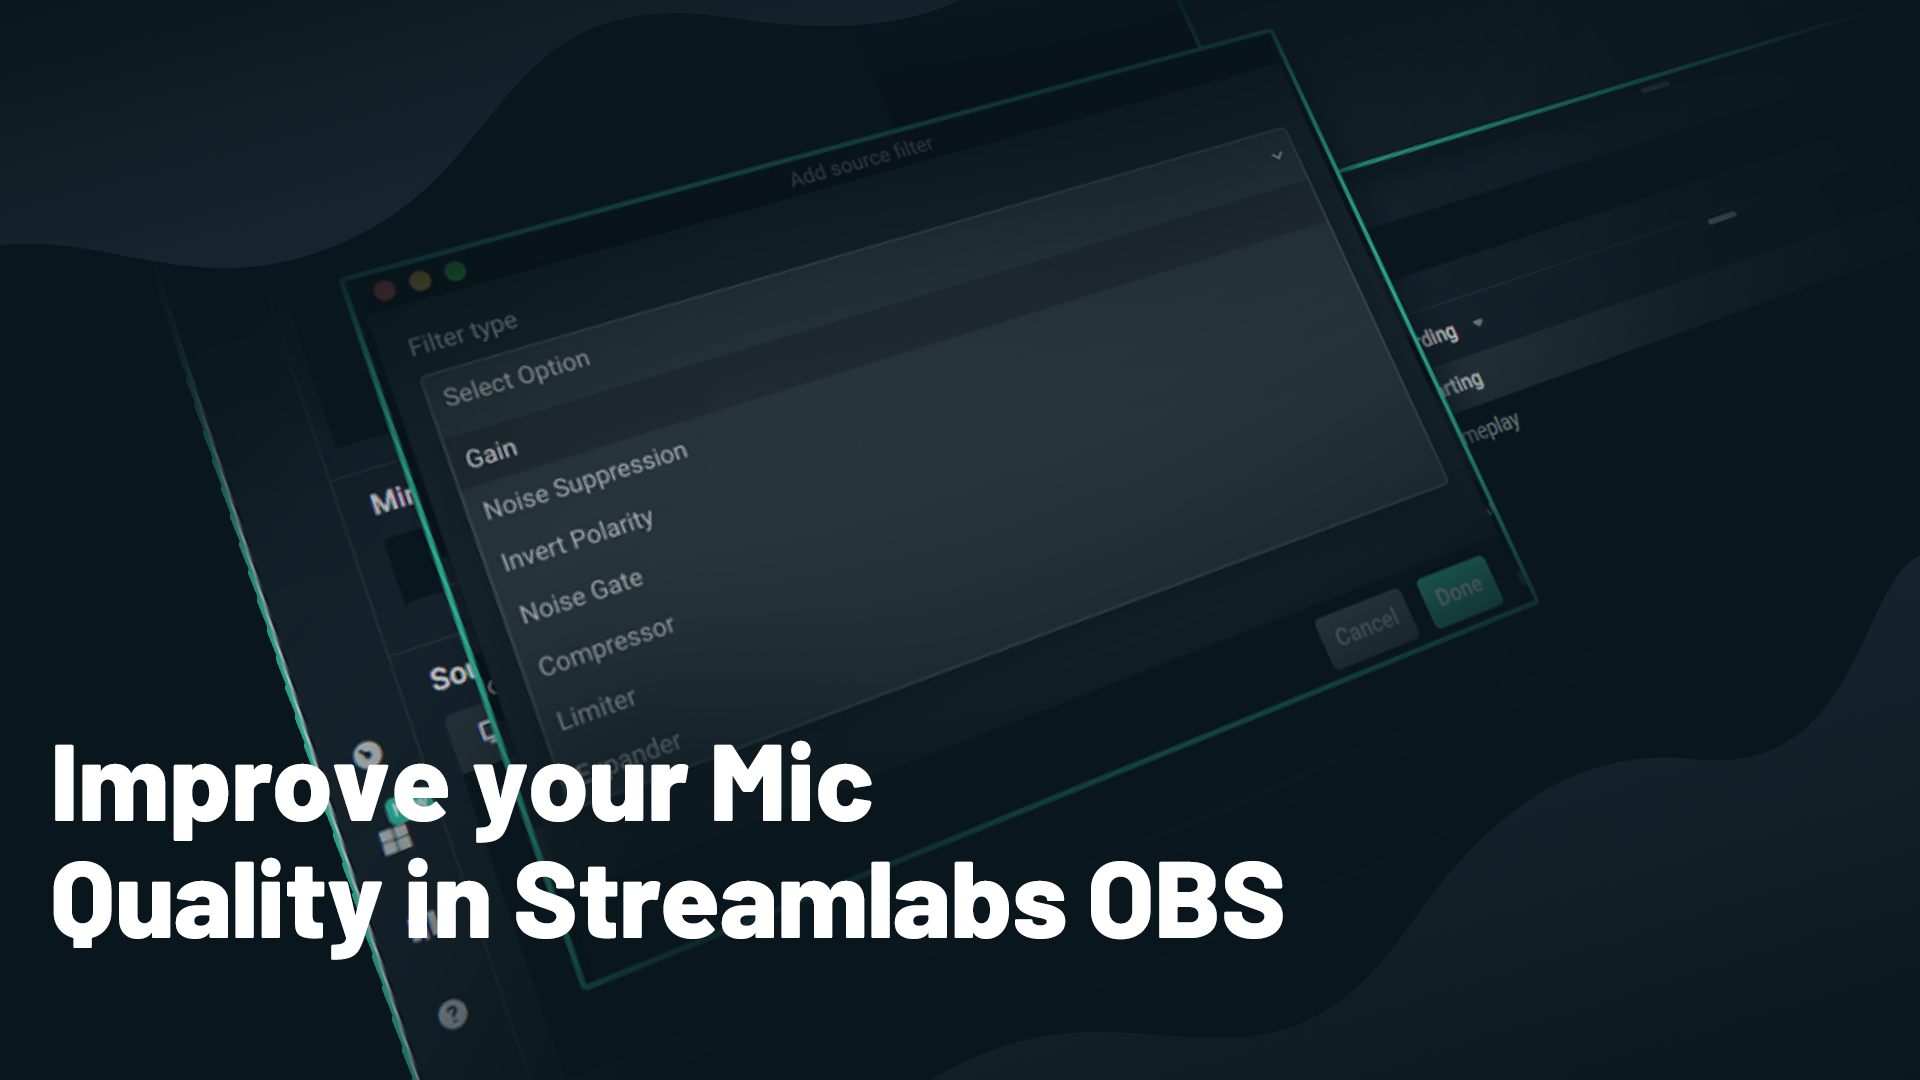 How To Improve Mic Quality In Streamlabs Obs By Ethan May Streamlabs Blog